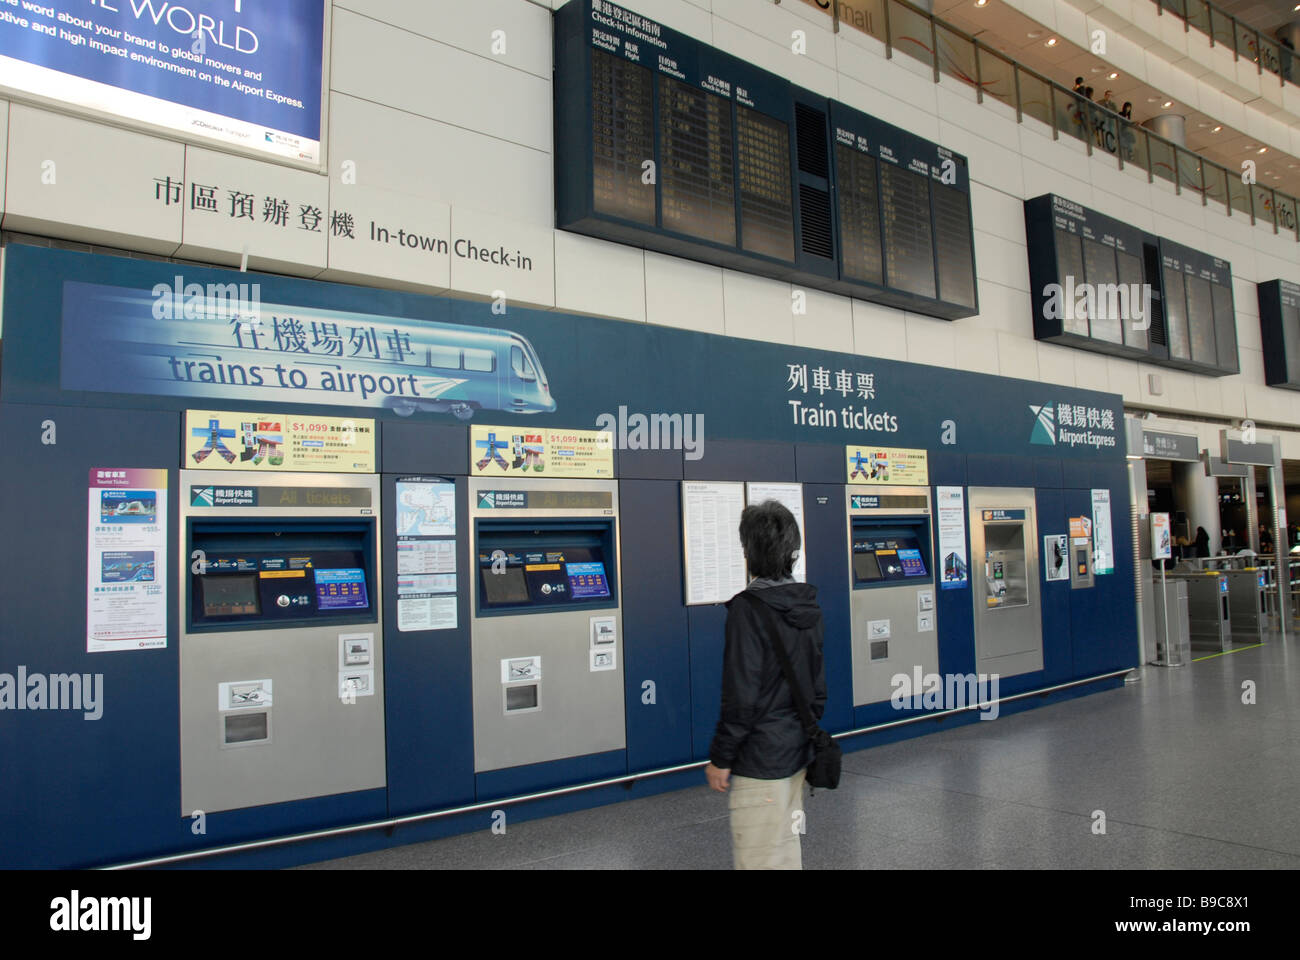 airport terminal, train to airport, in-town check-in, Hong Kong island, China Stock Photo